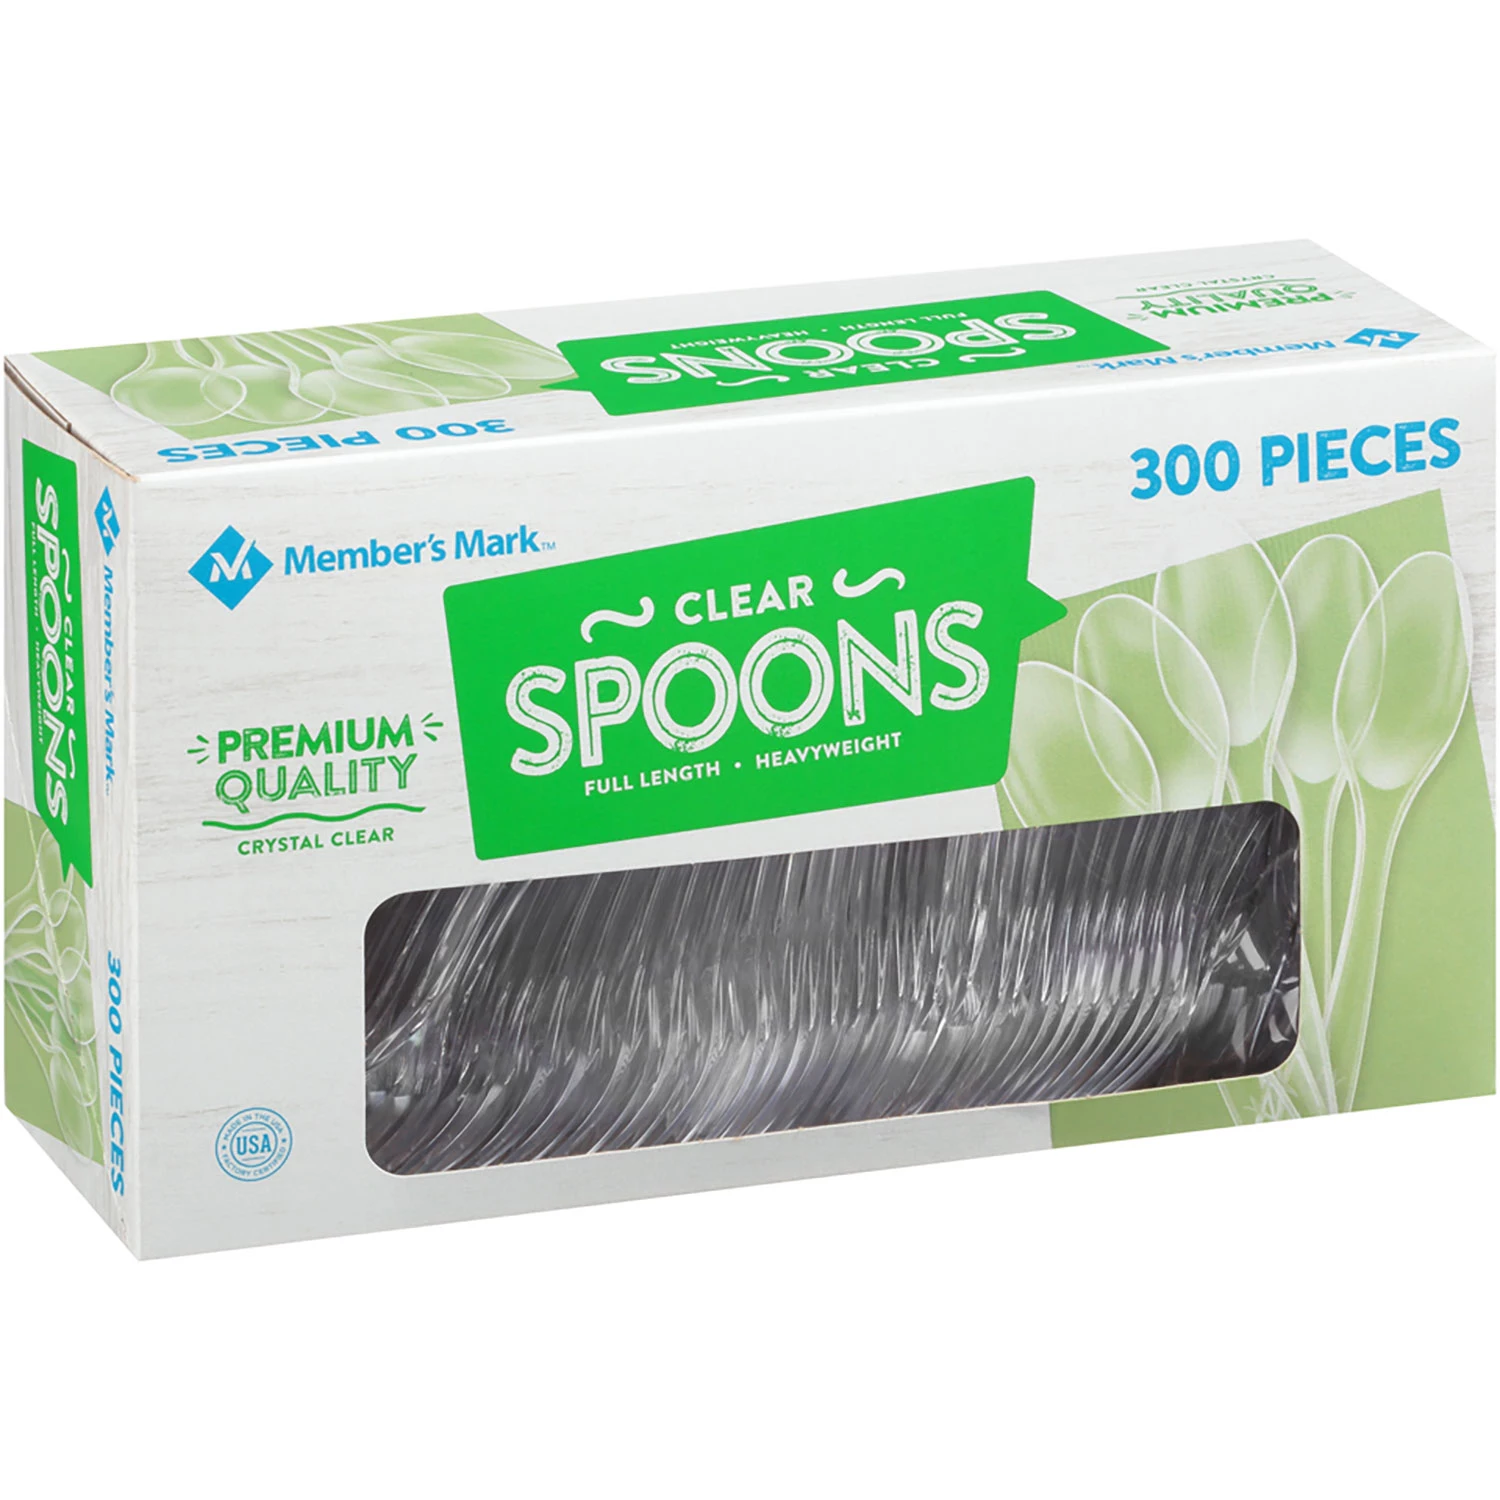 Member’s Mark Clear Plastic Spoons, Heavyweight (300 ct.)